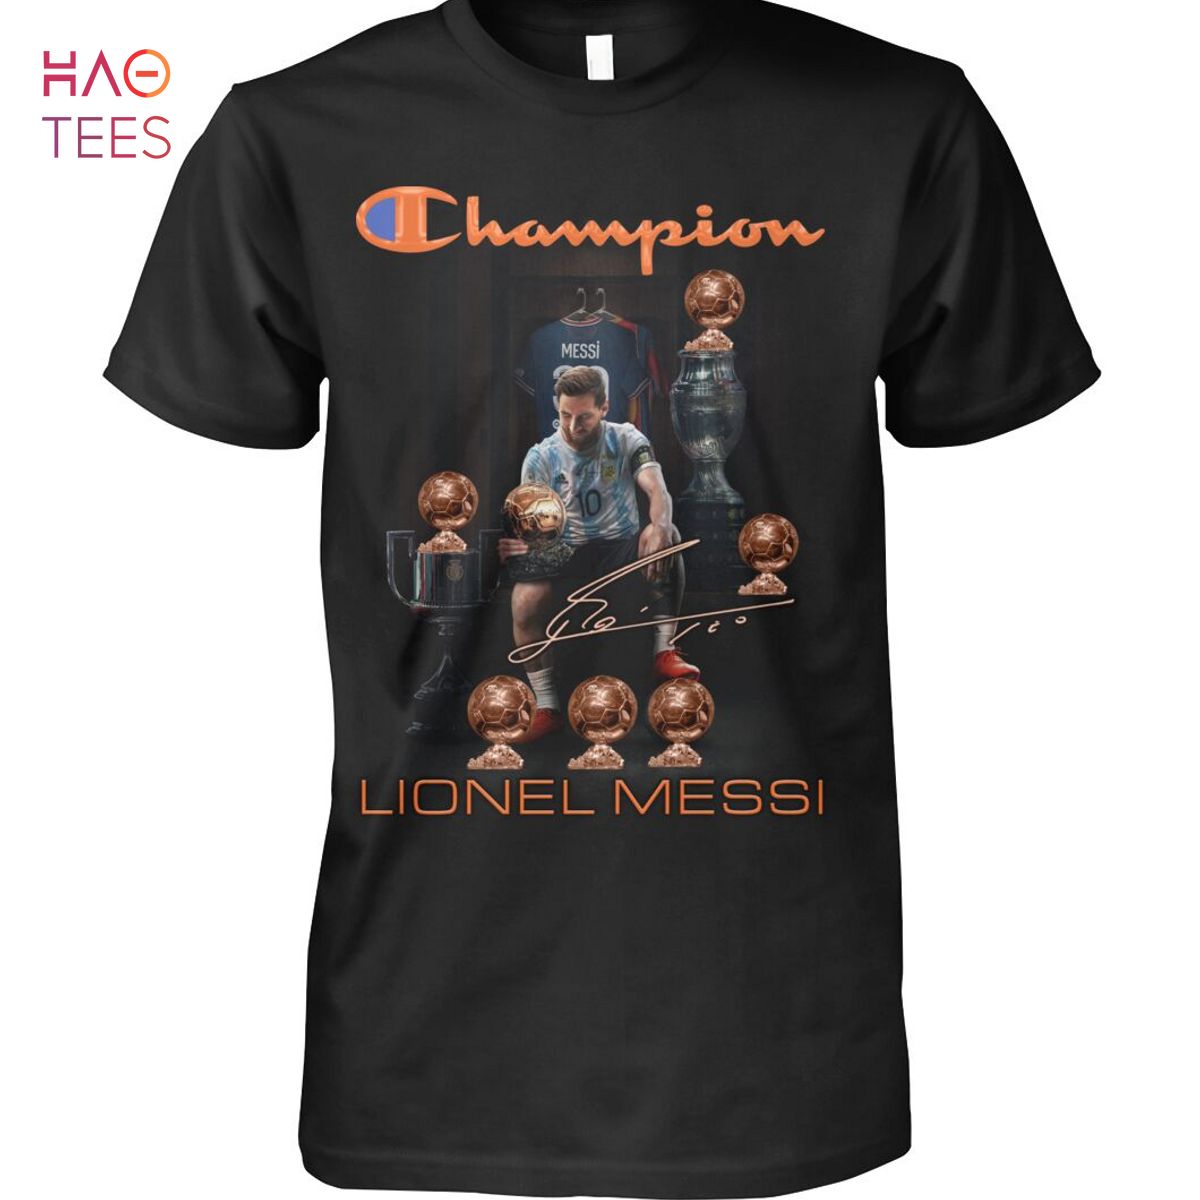 Champion Lionel Messi Shirt Limired Edition